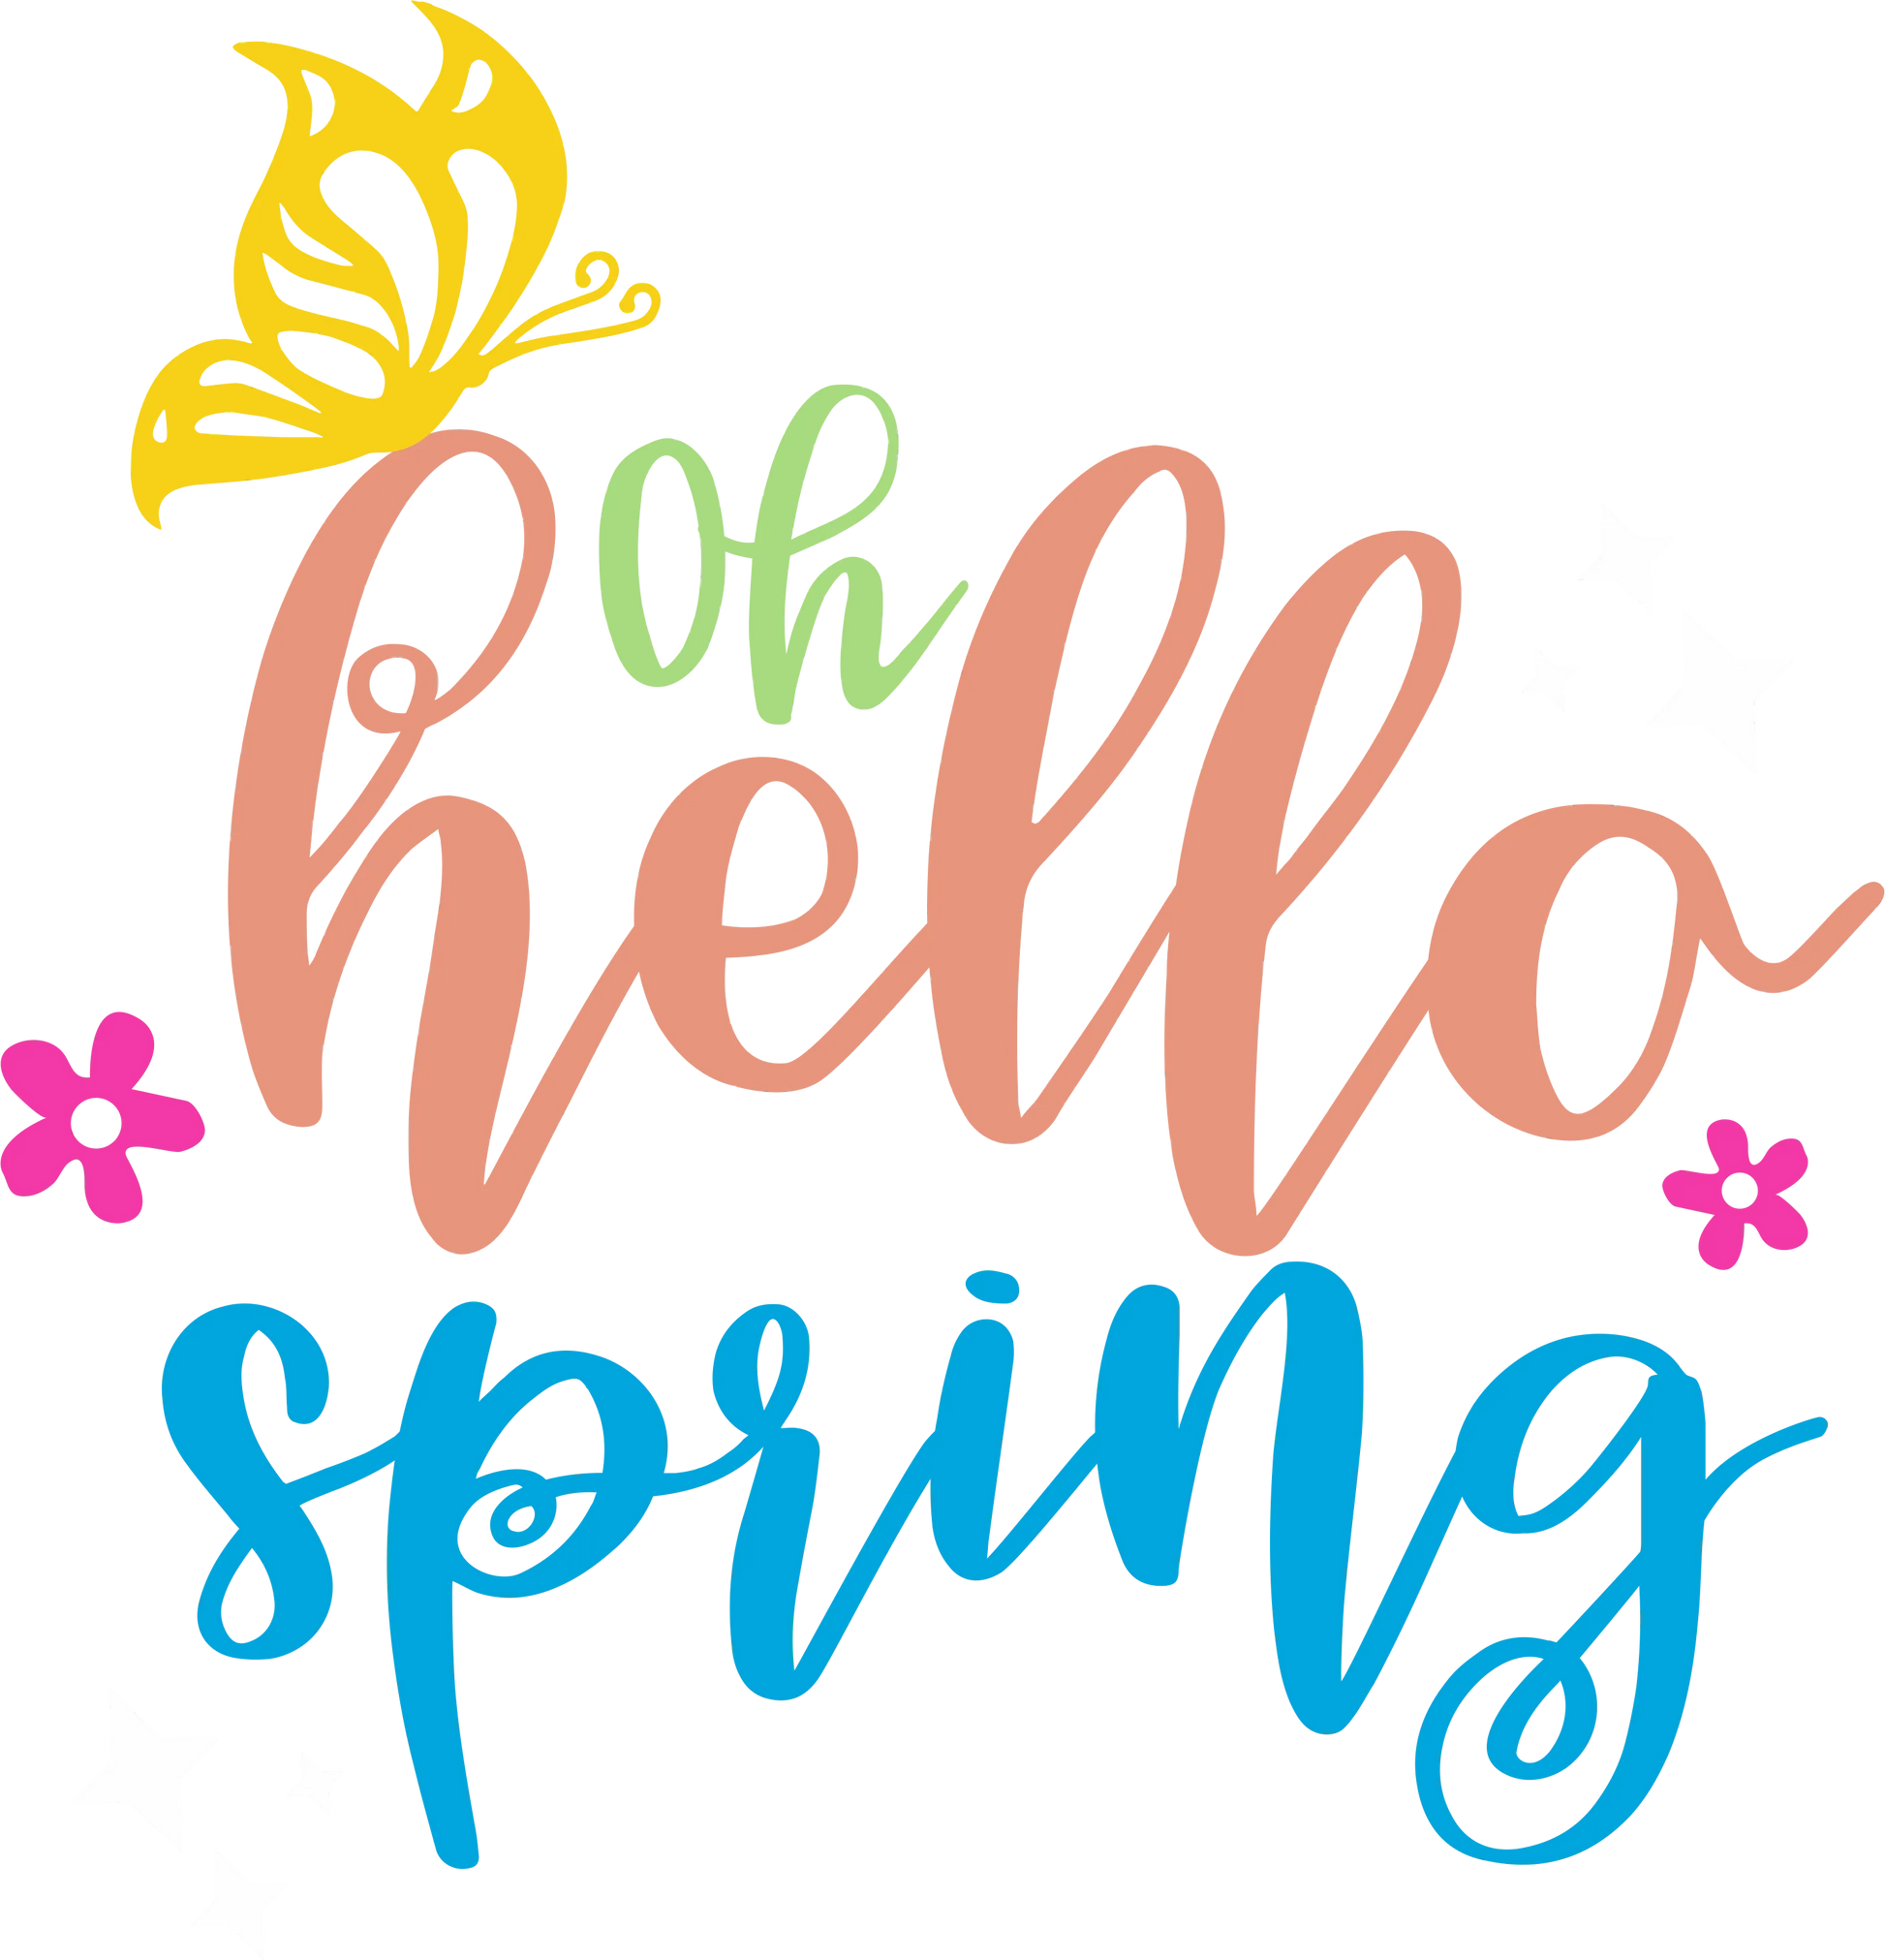 SEF 3  - "Oh Hello Spring" DTF Transfer, DTF Transfer, Apparel & Accessories, Ace DTF